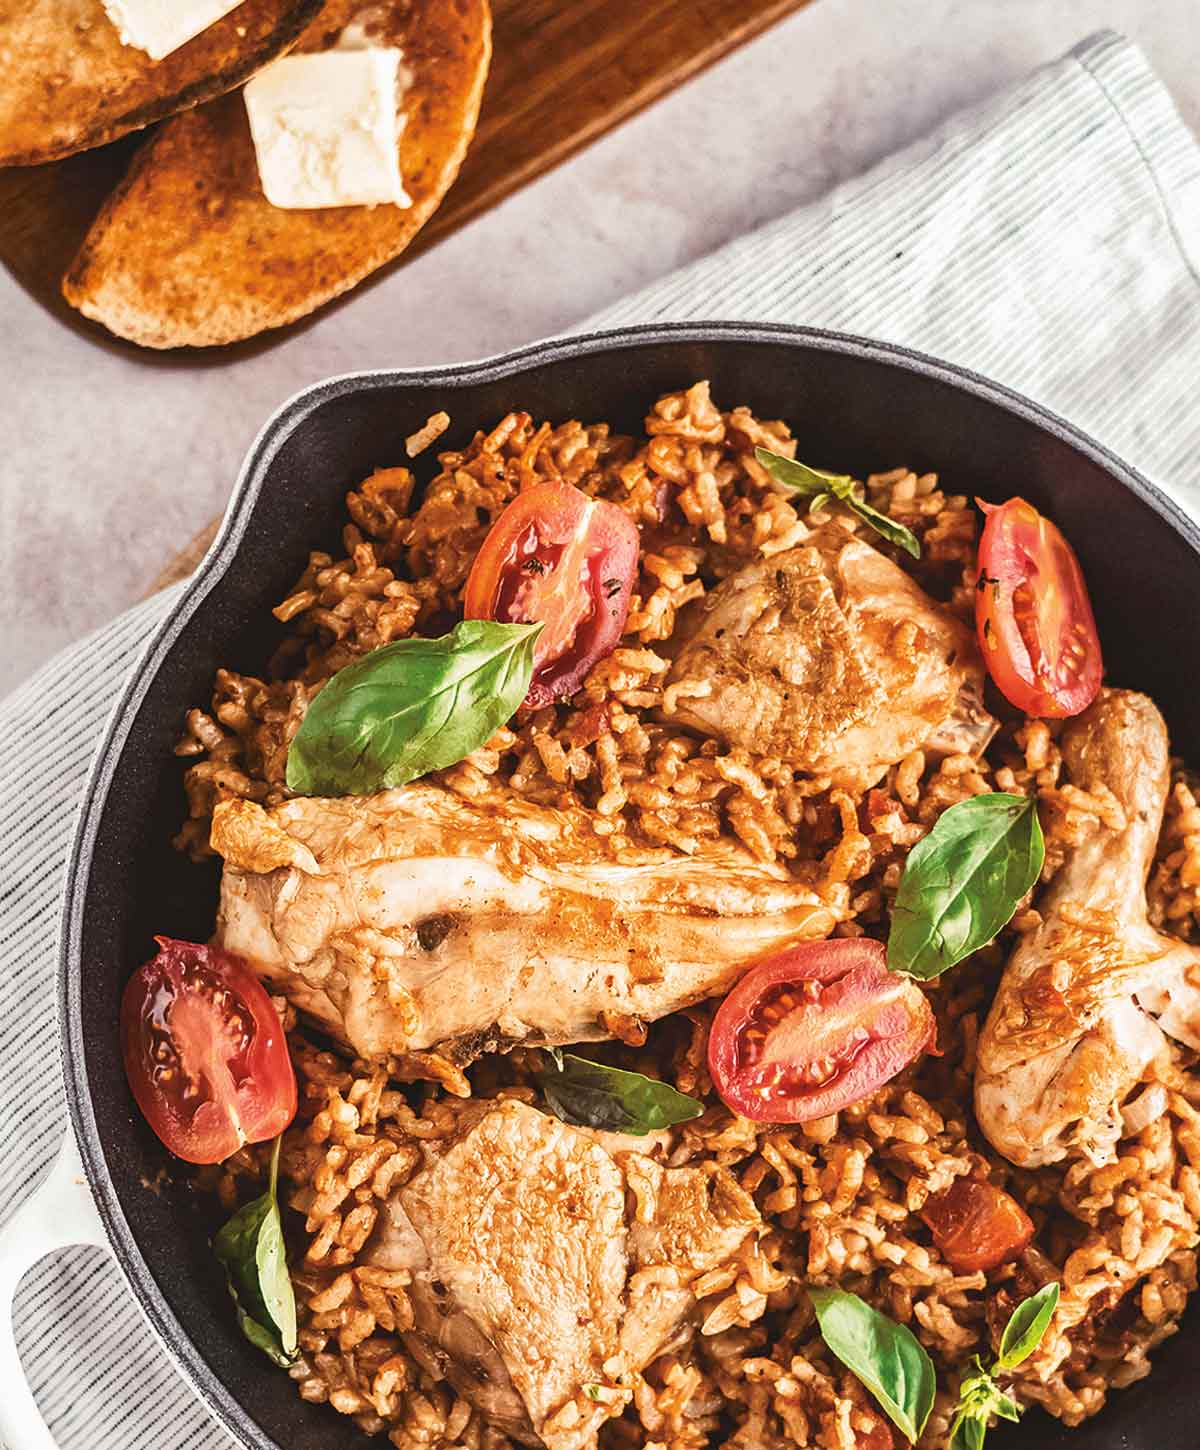 A cast-iron skillet with chicken, orzo, tomatoes, and garnished with basil. A wooden bread board with slices of buttered bread sits beside it.